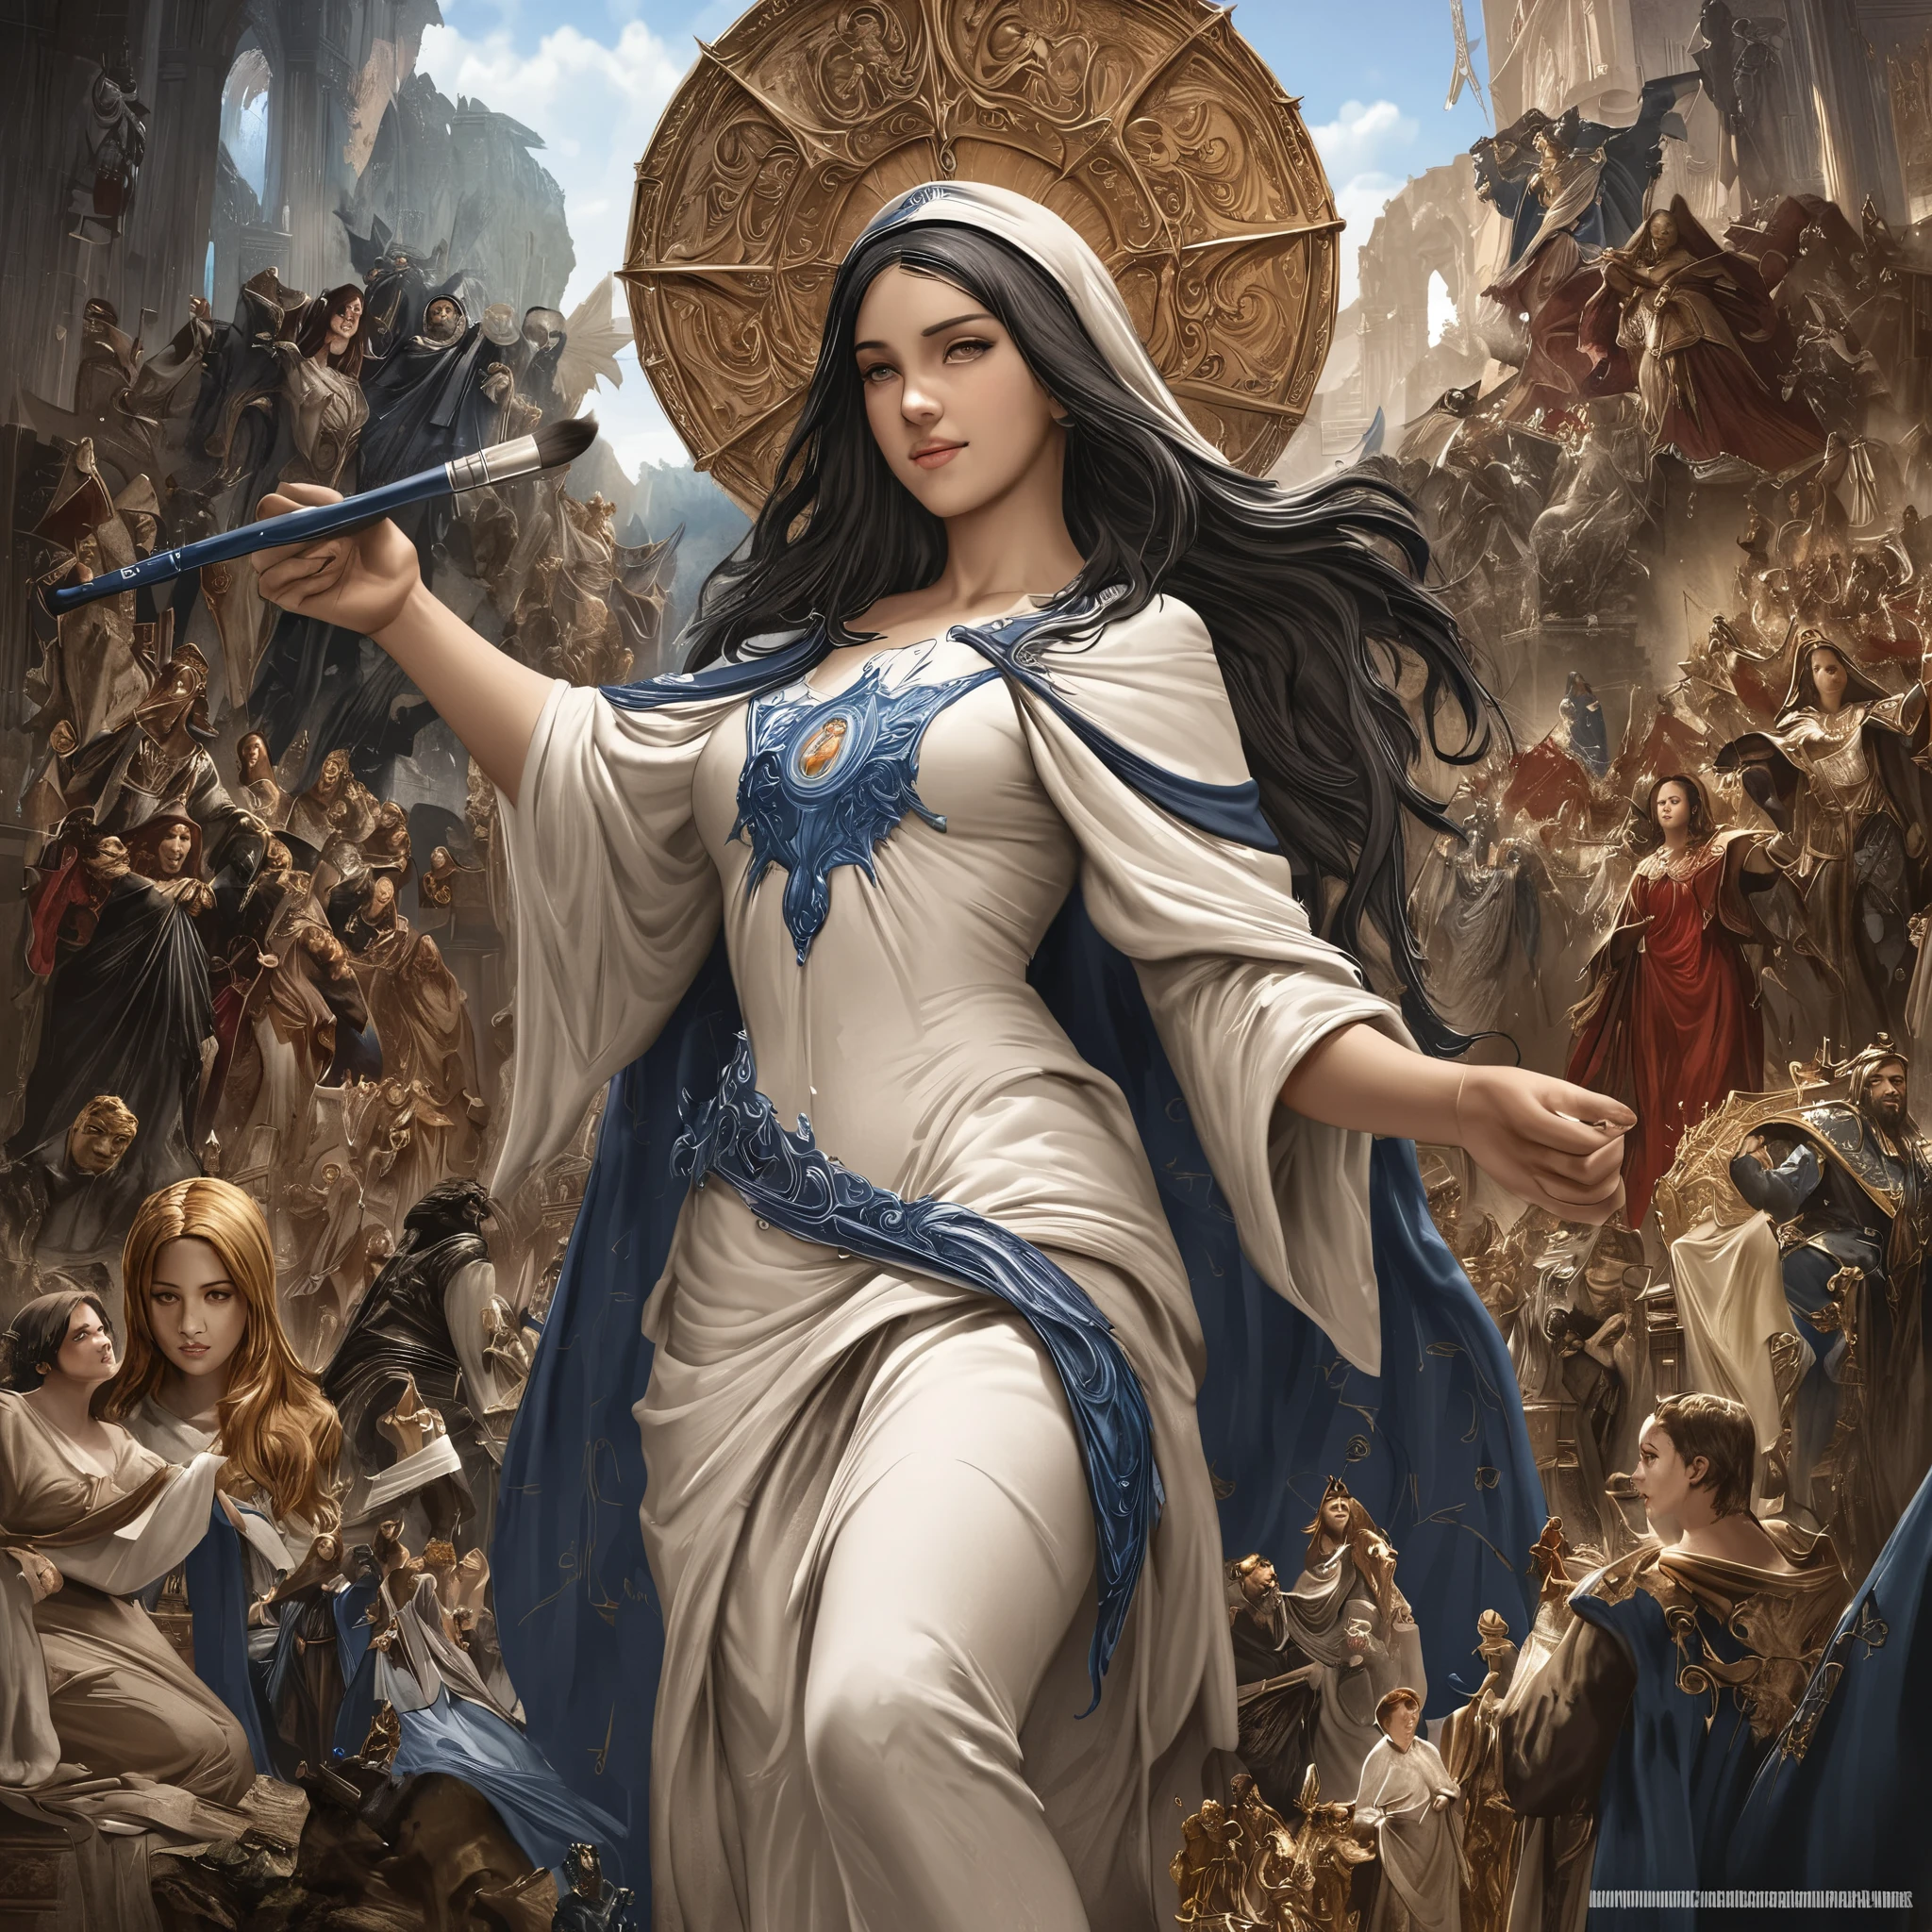 A beautiful ultra-thin Realistic portrait of the Virgin Mary, White outfit with blue details, ((Divinity)), whole body, Biblical, Realistic, Intricate details, Abbott Fuller Graves, Bartolomé Esteban Murillo, JC Leyendecker, Craig Mullins, Peter Paul Rubens, (Caravaggio), Art Station Trends, 8k, Concept Art, Fantasy art, PhotoRealistic, Realistic, figure, oil, Surrealism, HyperRealistic, brush brush, Digital Art, style, watercolor